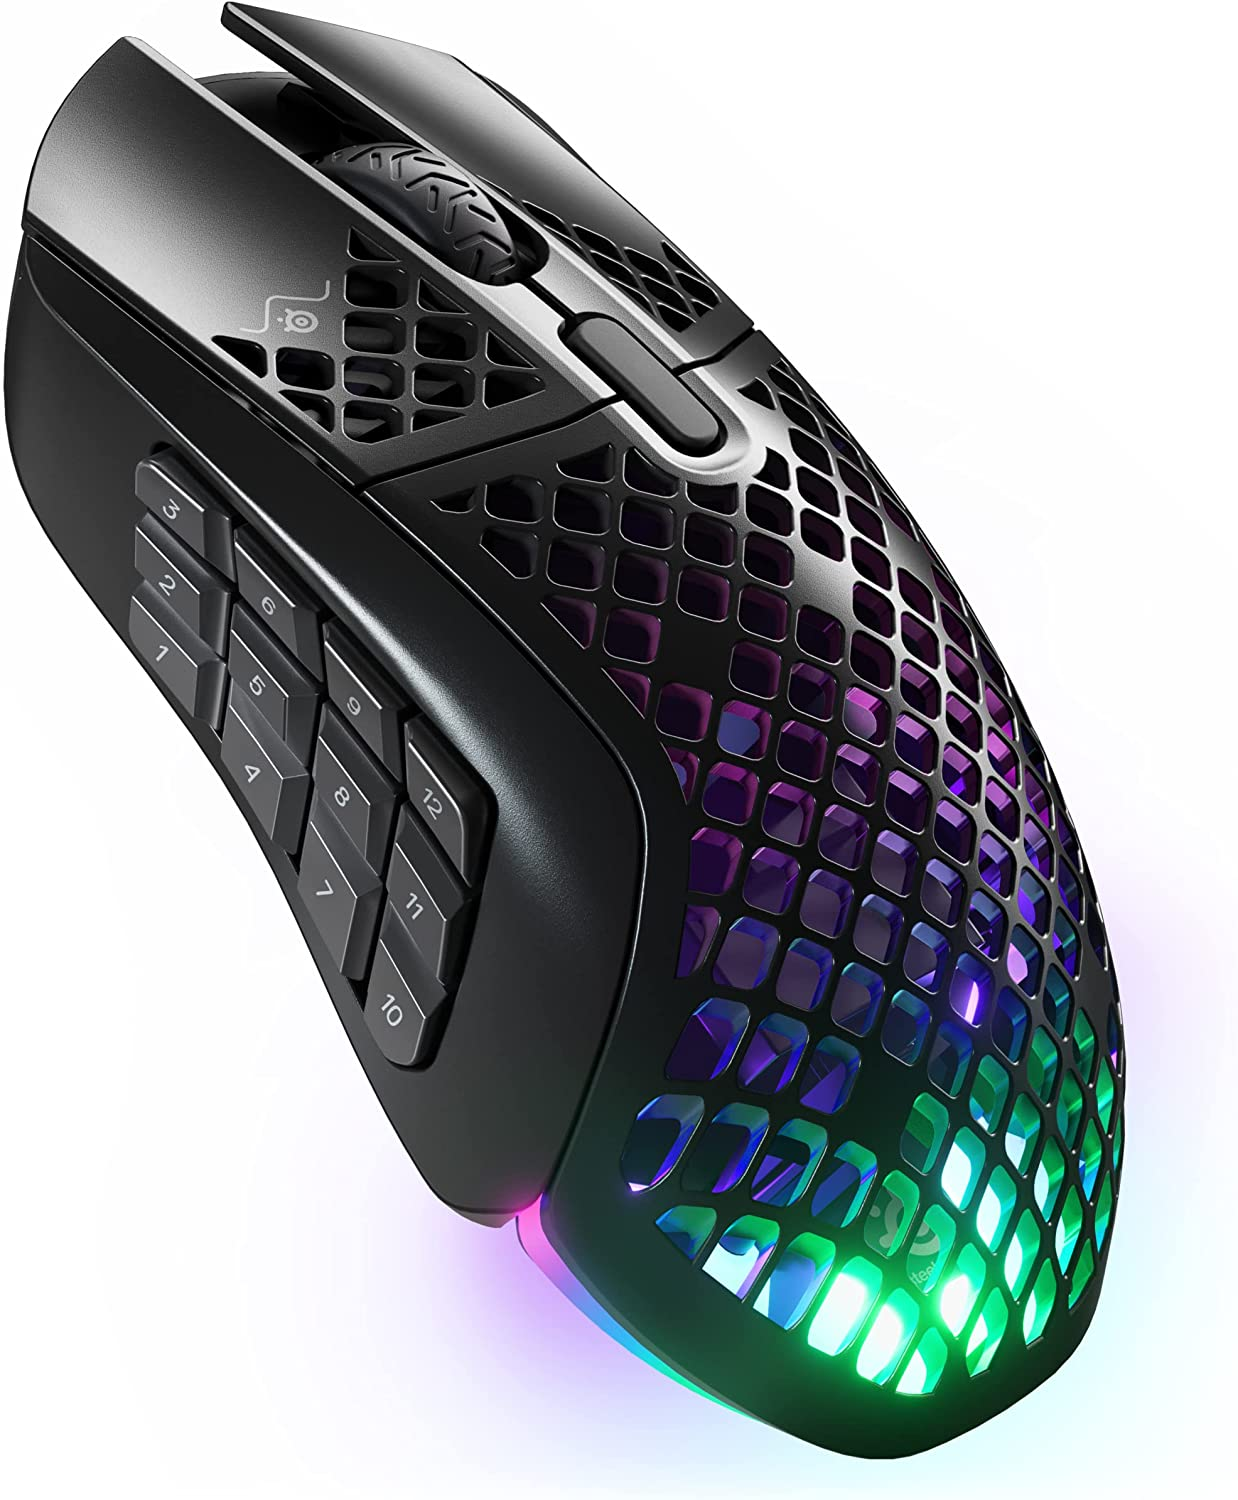 The buttons of a gaming mouse can be programmed using the manufacturer's software.